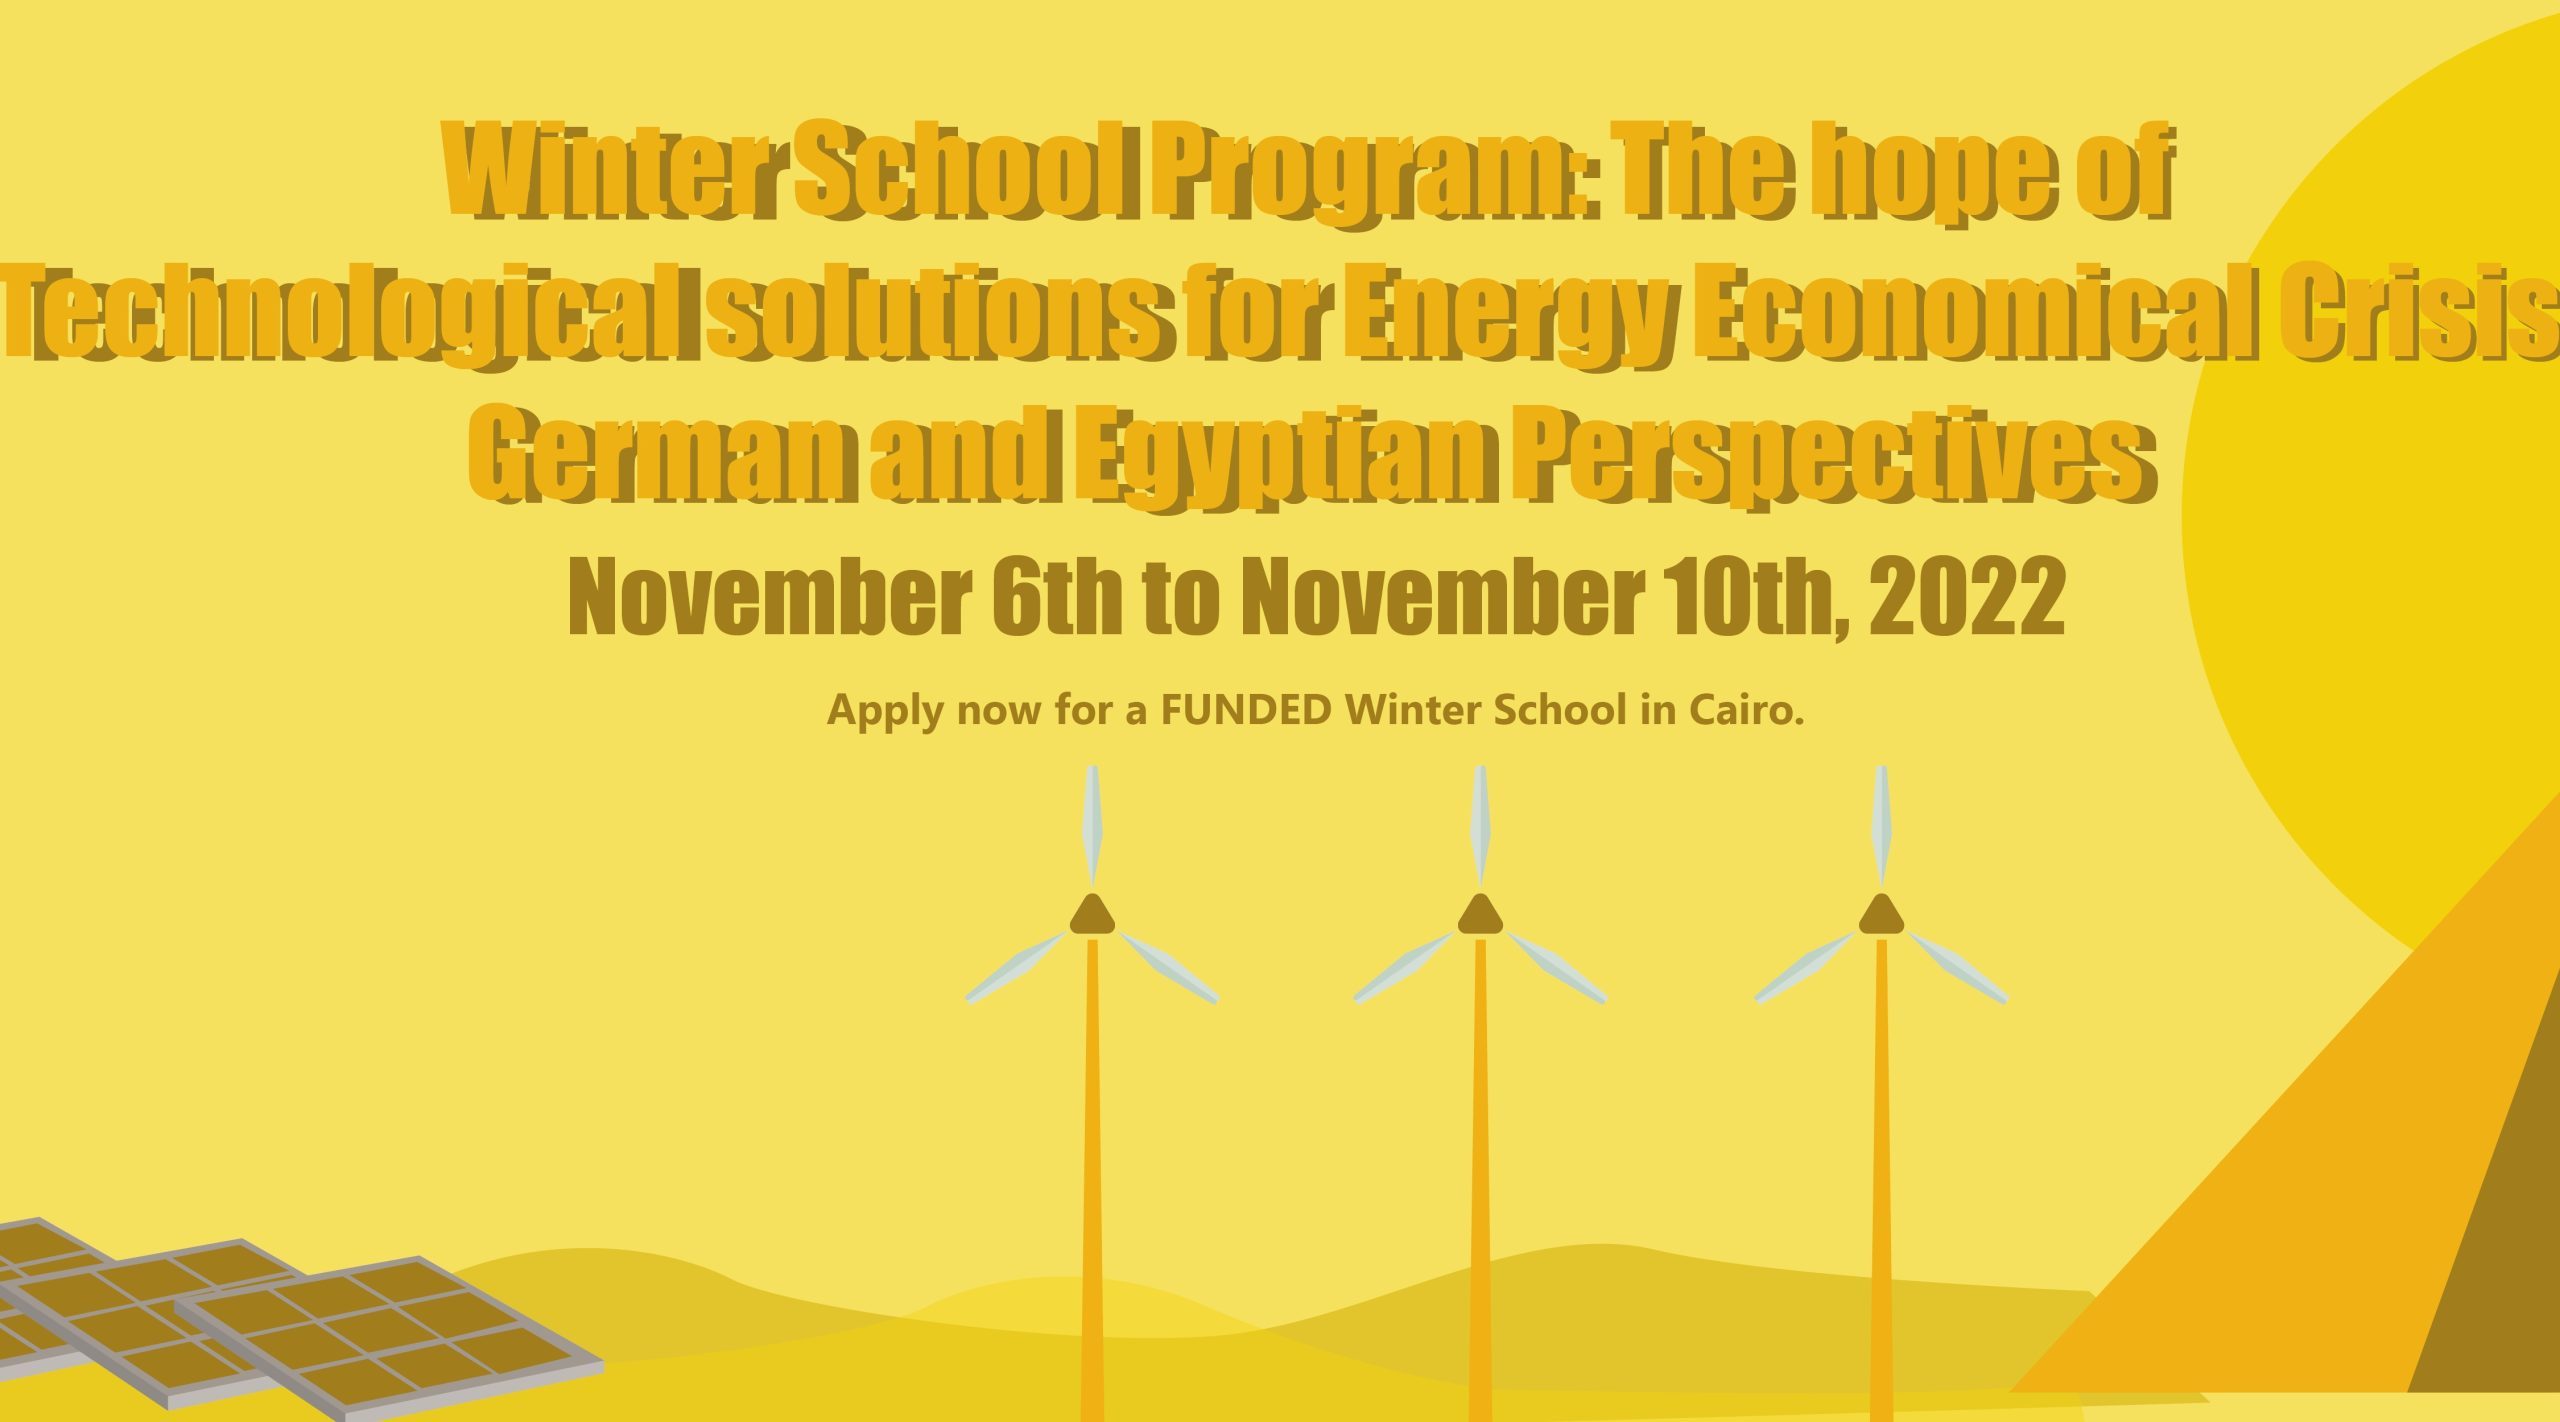 BaSEF: Winter School Program: The hope of Technological solutions for Energy Economical Crisis – German and Egyptian Perspectives